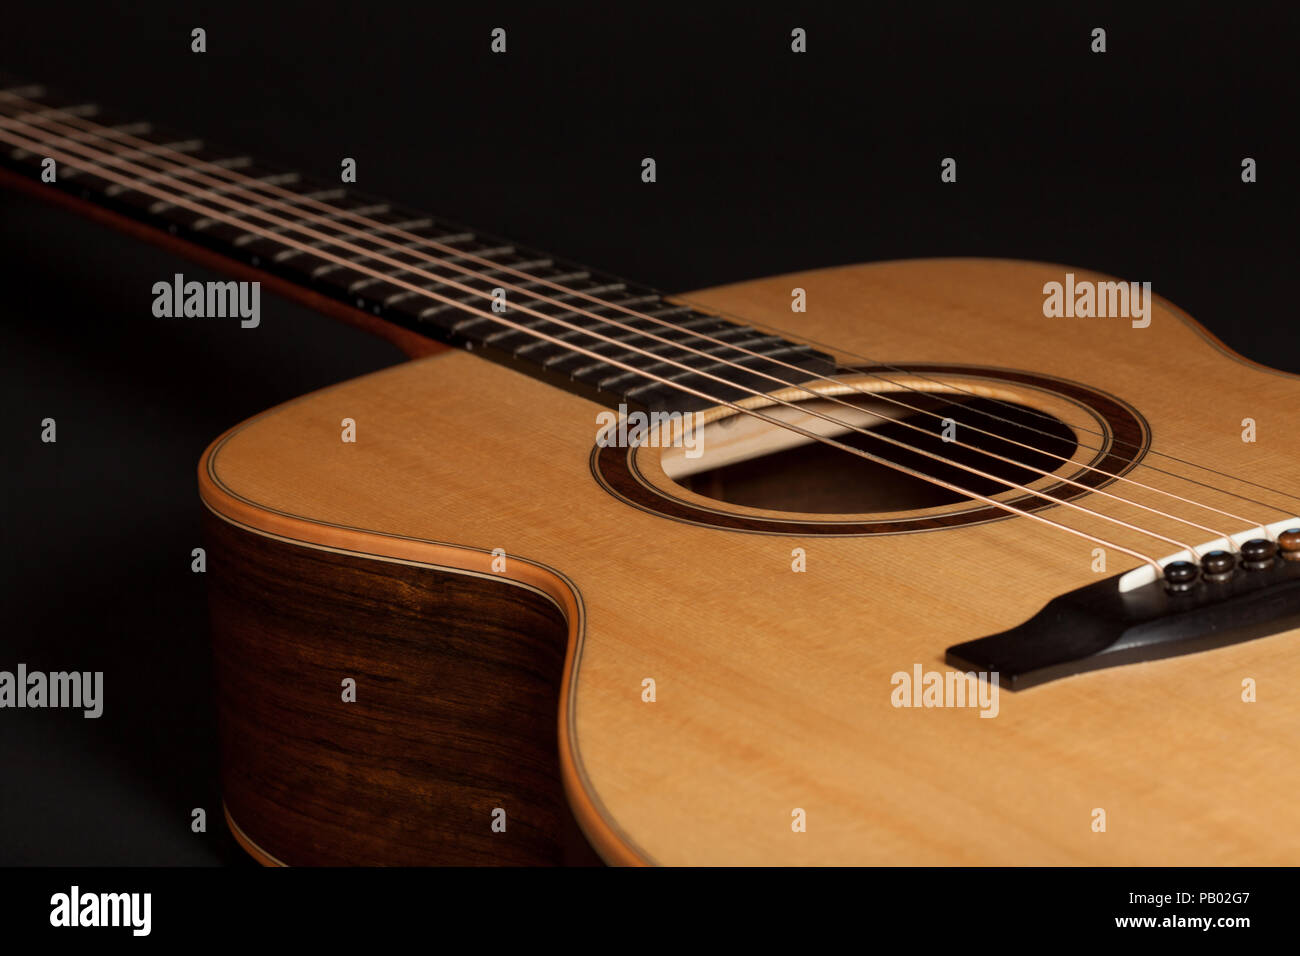 High quality steel-string acoustic guitar. Hand-made wooden musical instrument with European spruce wood top and Ovangkol side. Close-up of body and s Stock Photo